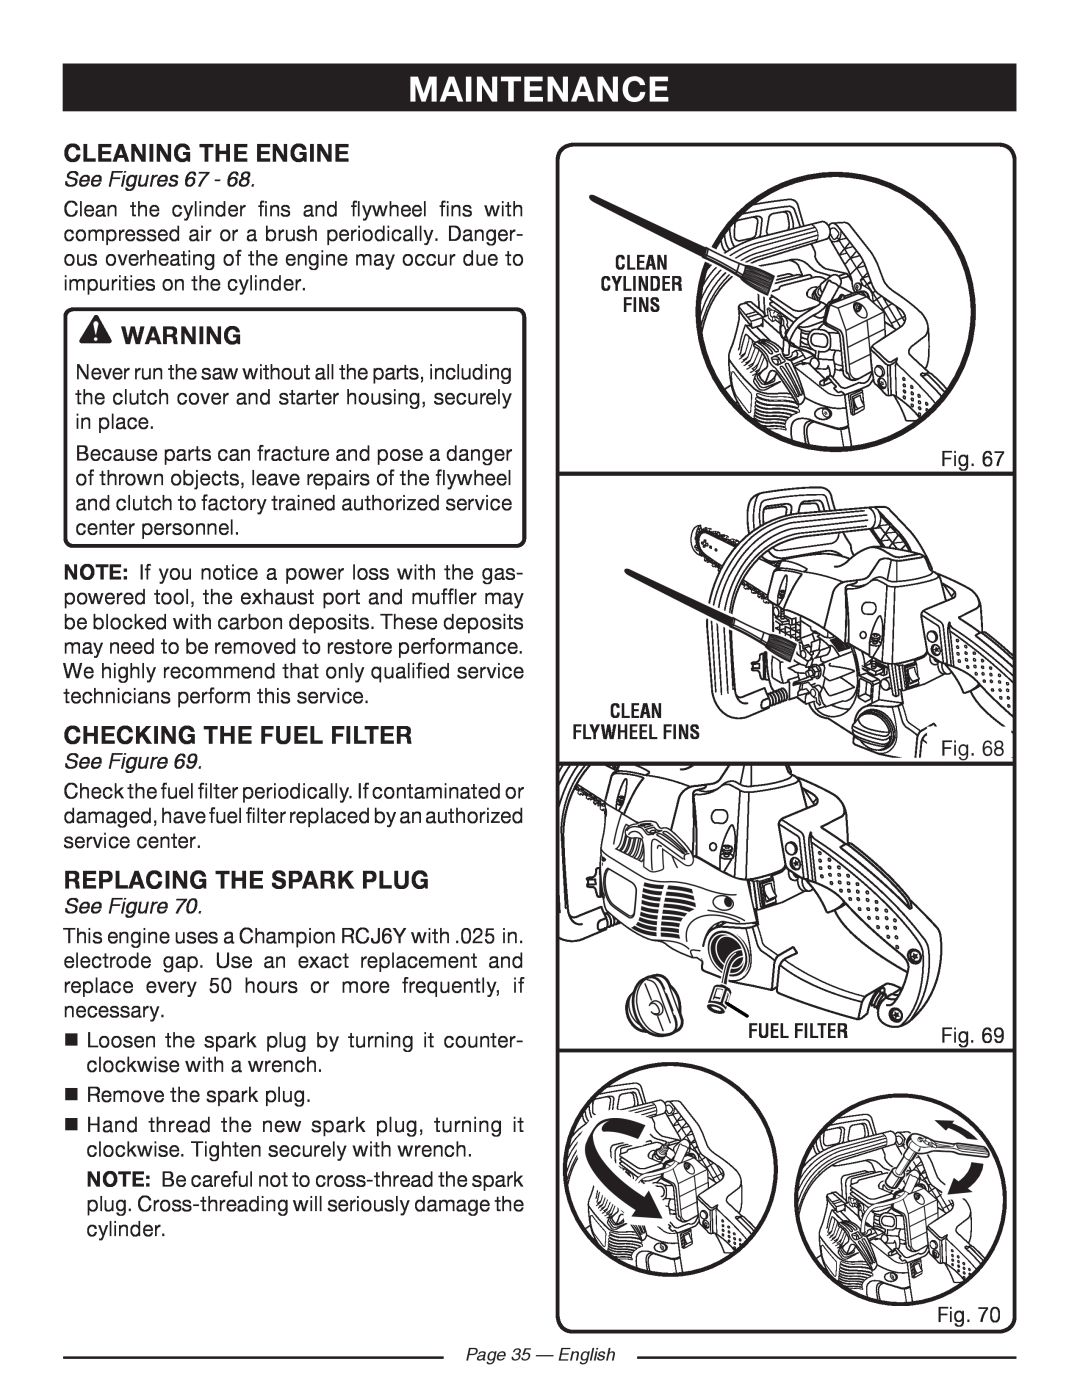 Ryobi RY10518 Cleaning The Engine, Checking The Fuel Filter, Replacing The Spark Plug, See Figures 67, Maintenance 